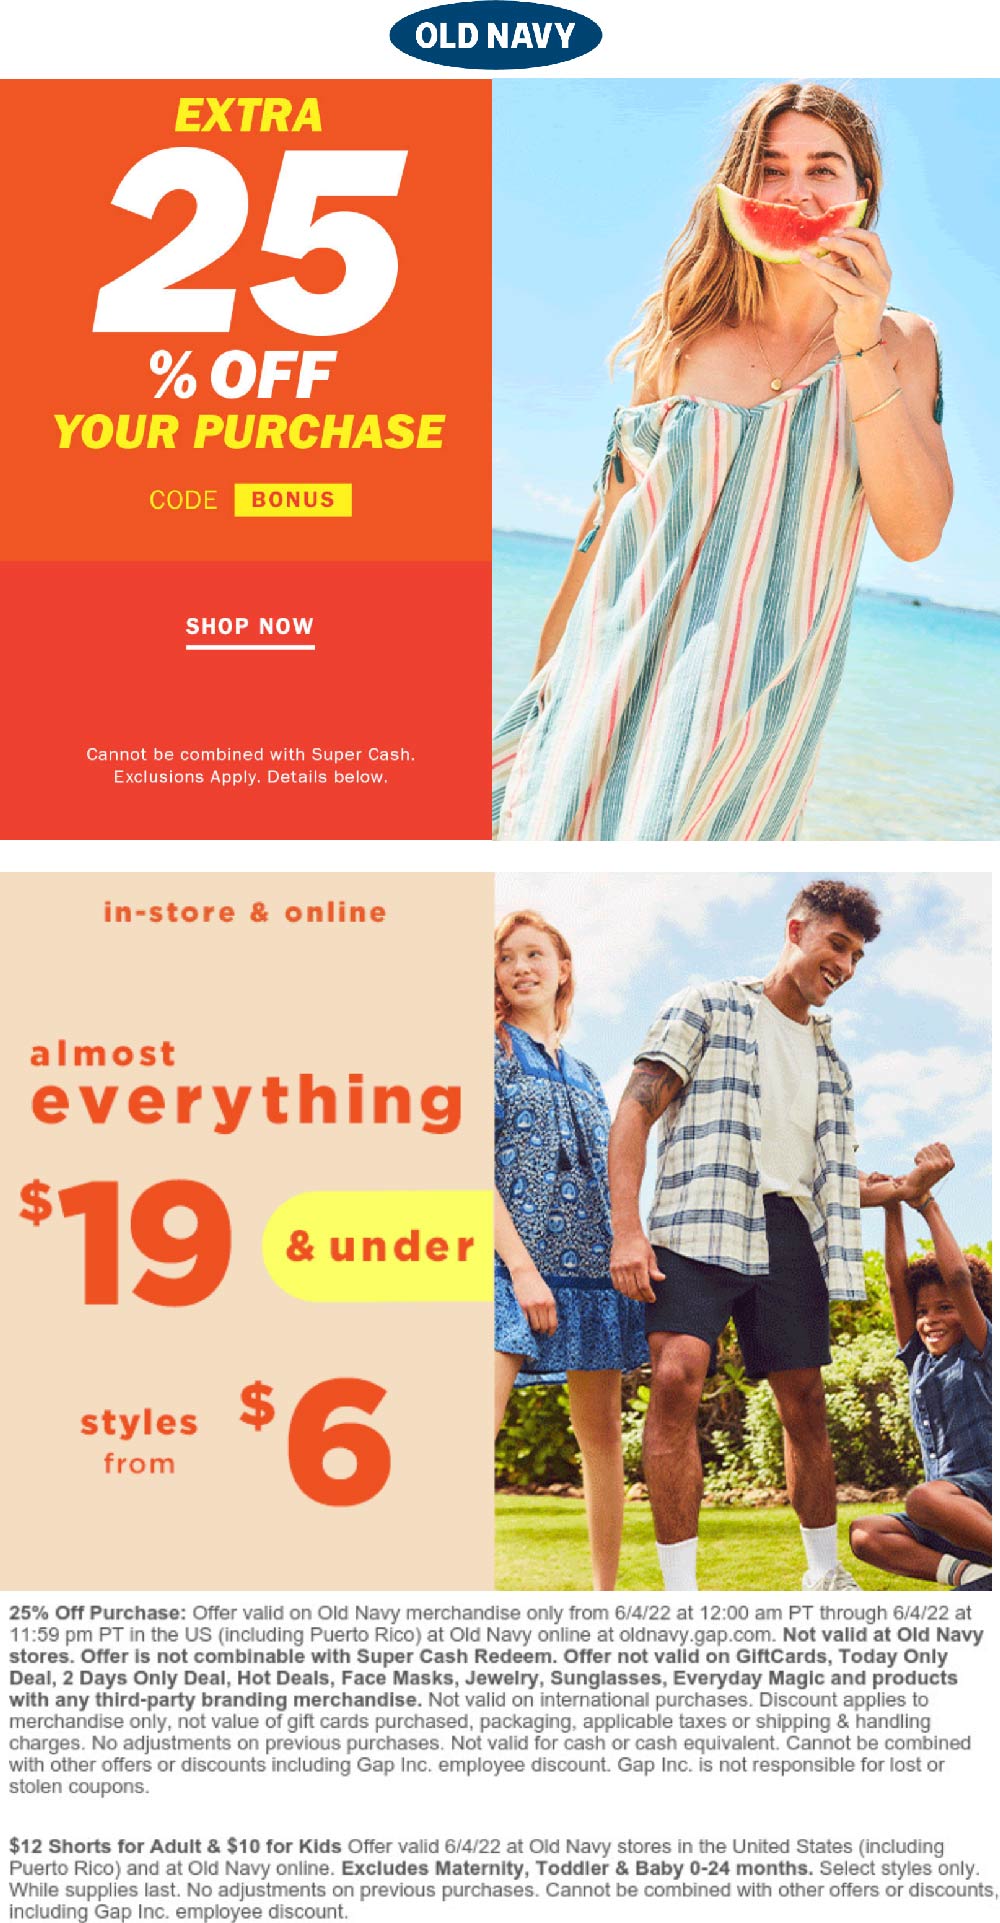 Old Navy stores Coupon  Extra 25% off online today at Old Navy via promo code BONUS #oldnavy 